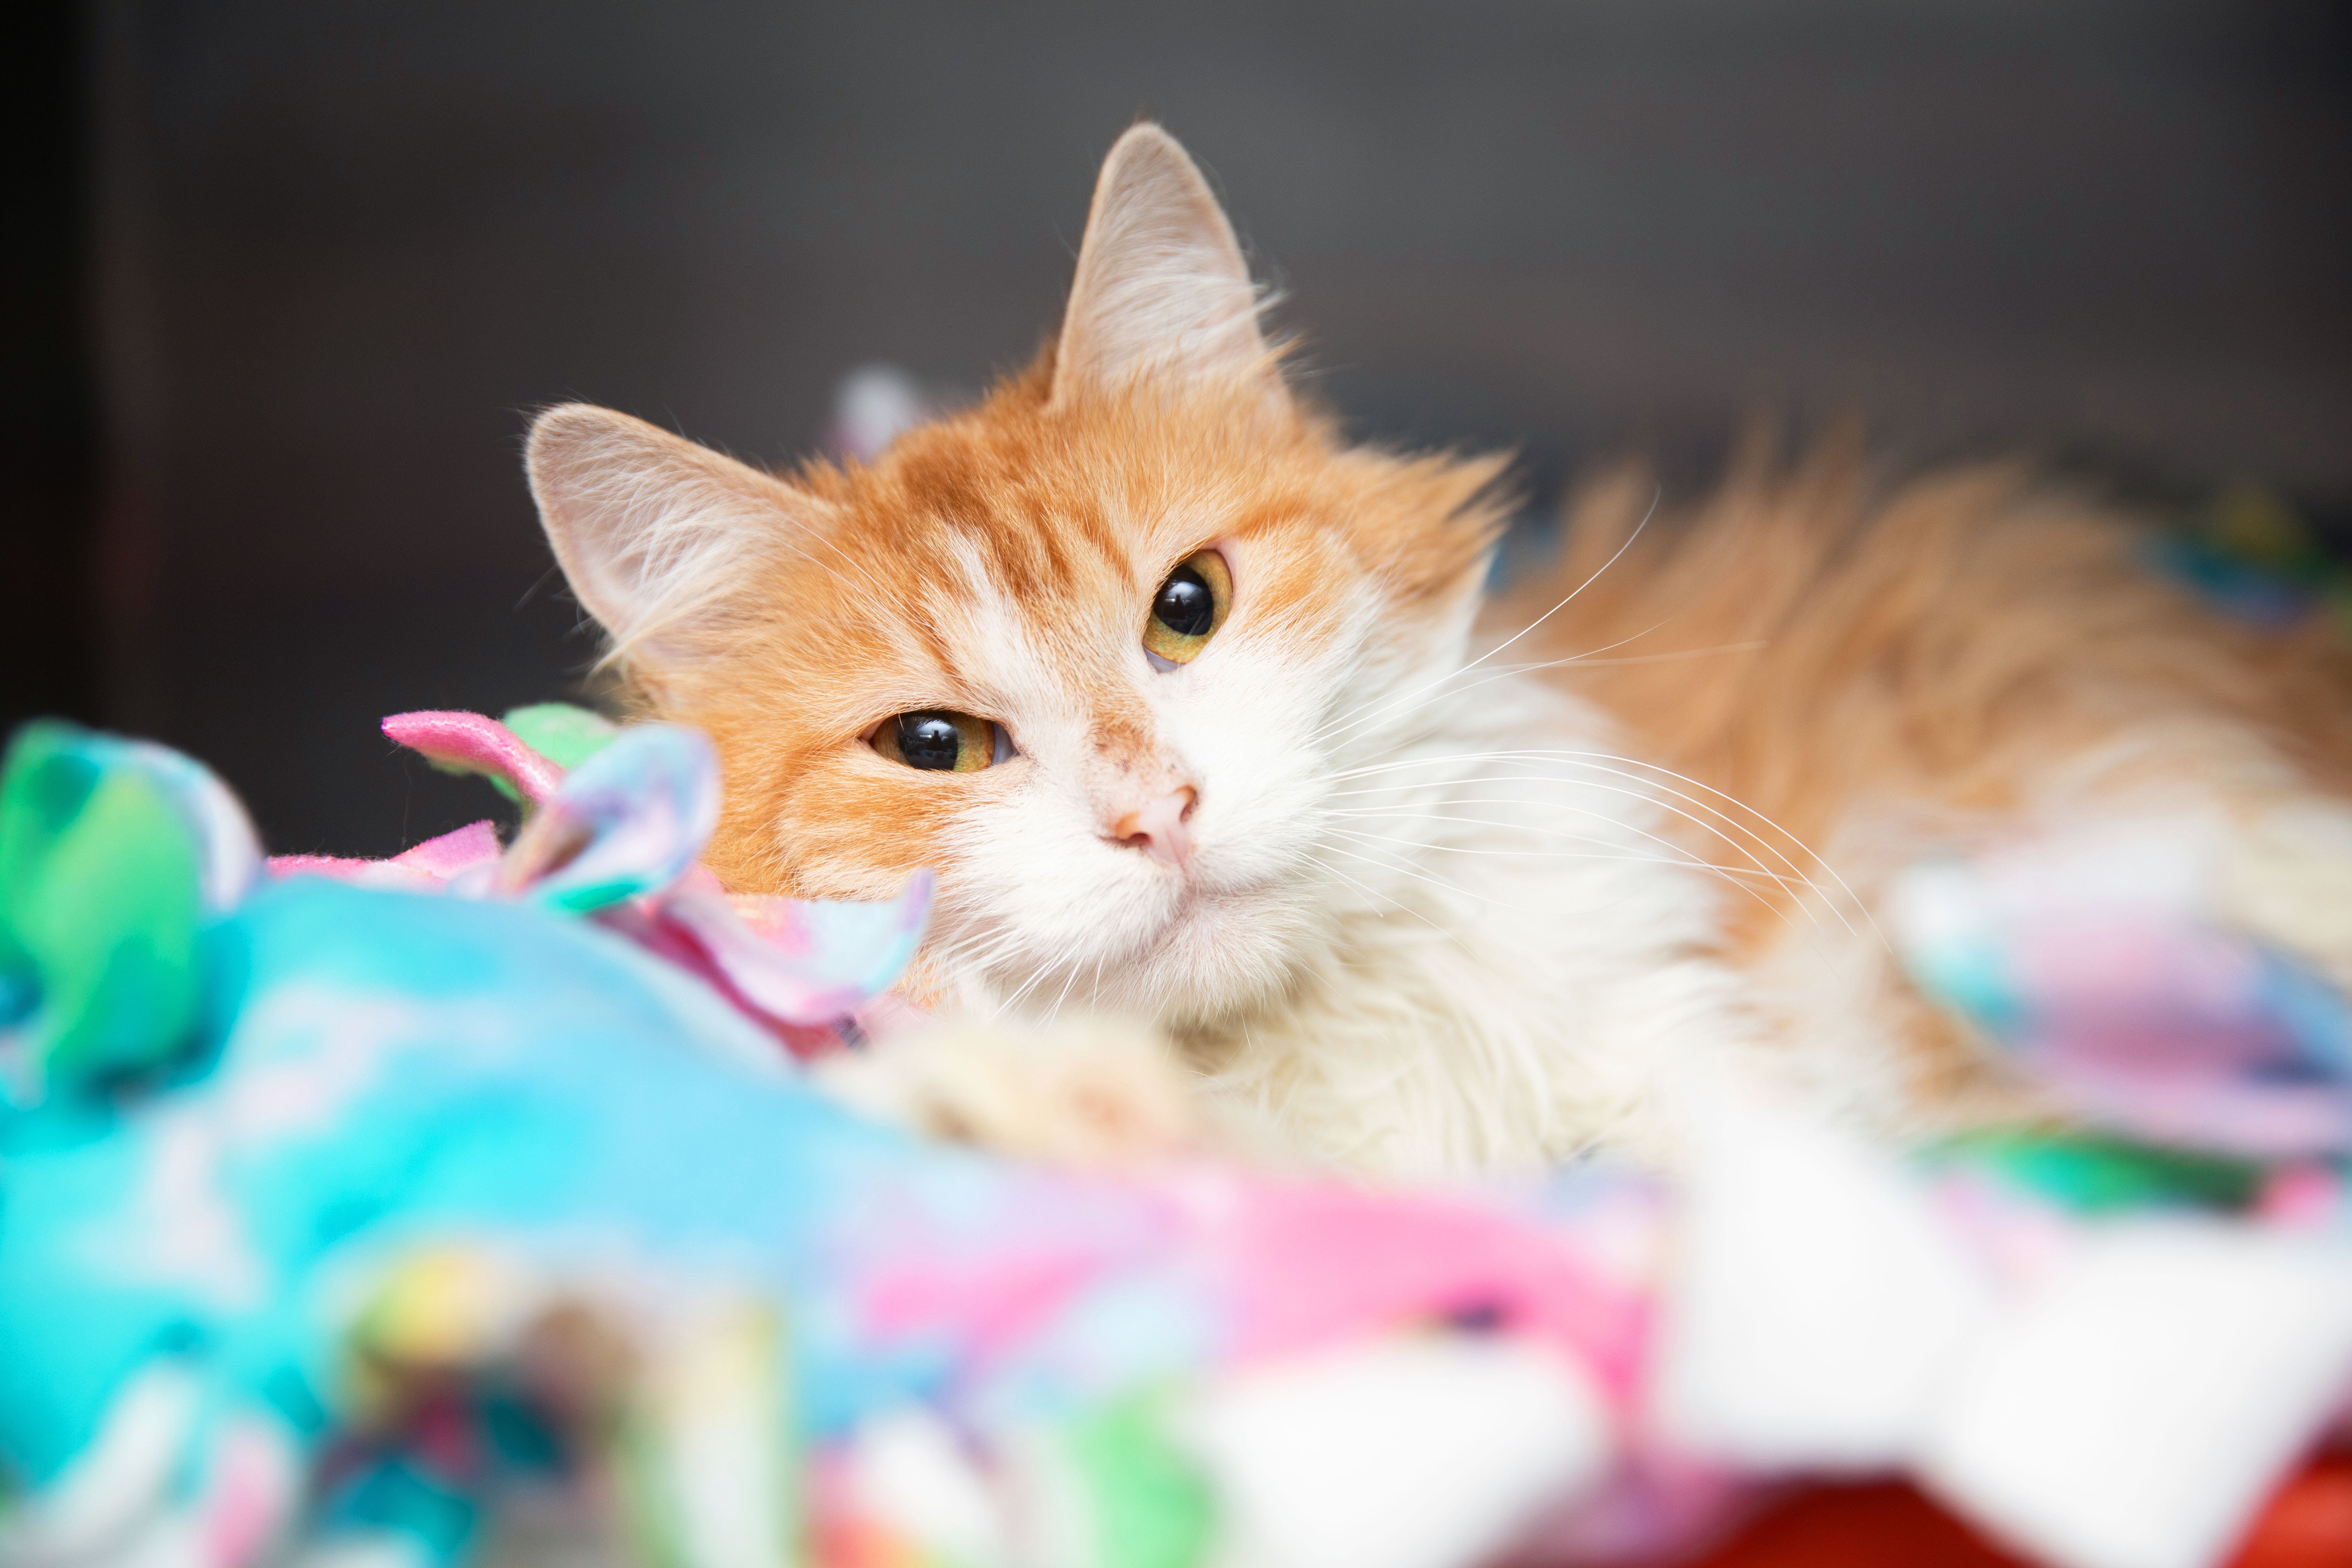 Orange and white cat lying on some multi-colored blankets